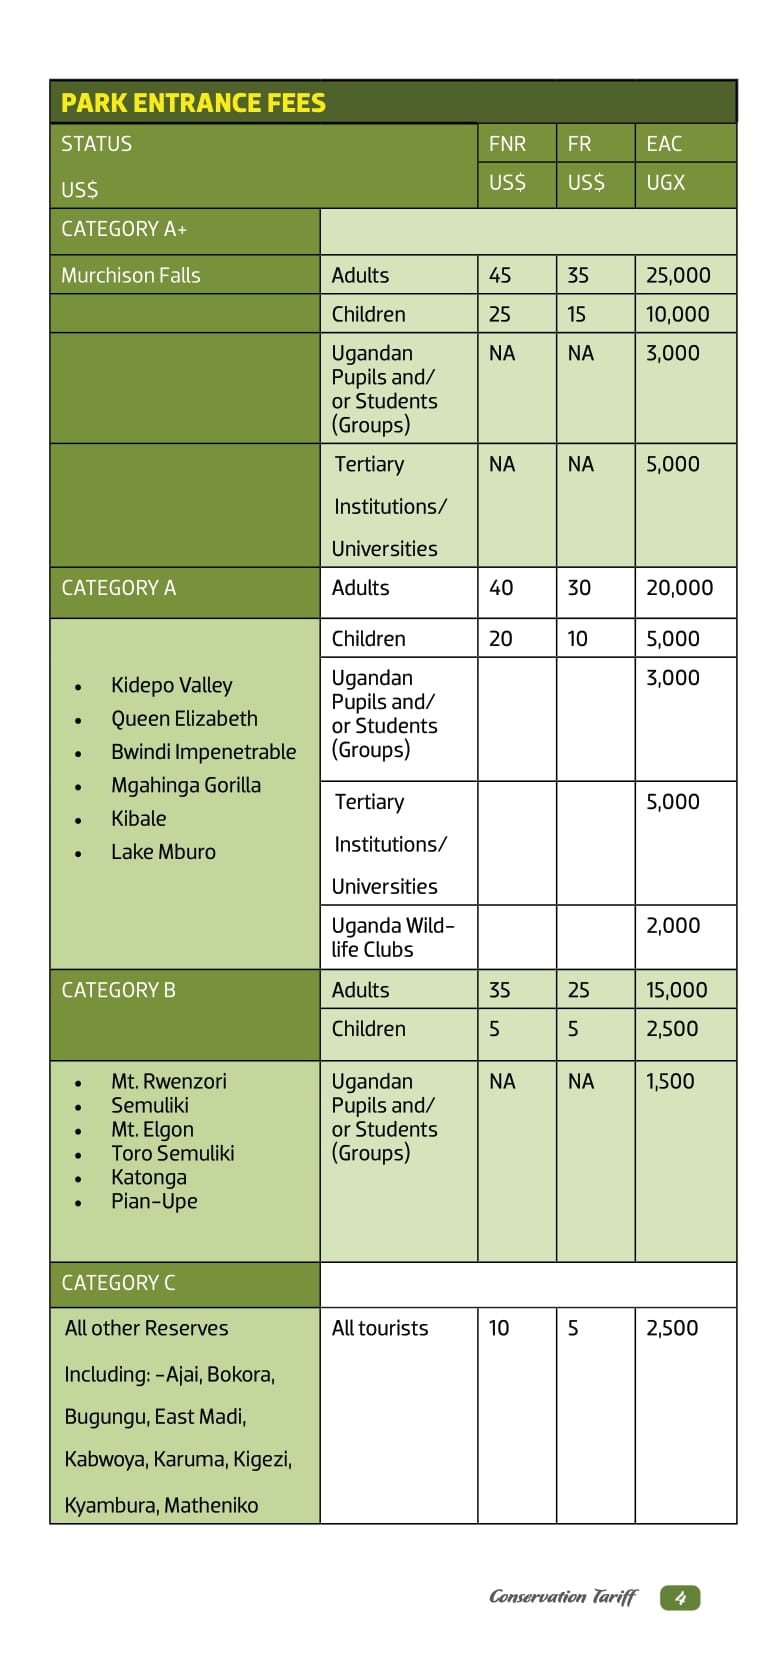 Lake Mburo National Park entrance fee and  entrance fees of all other UWA parks